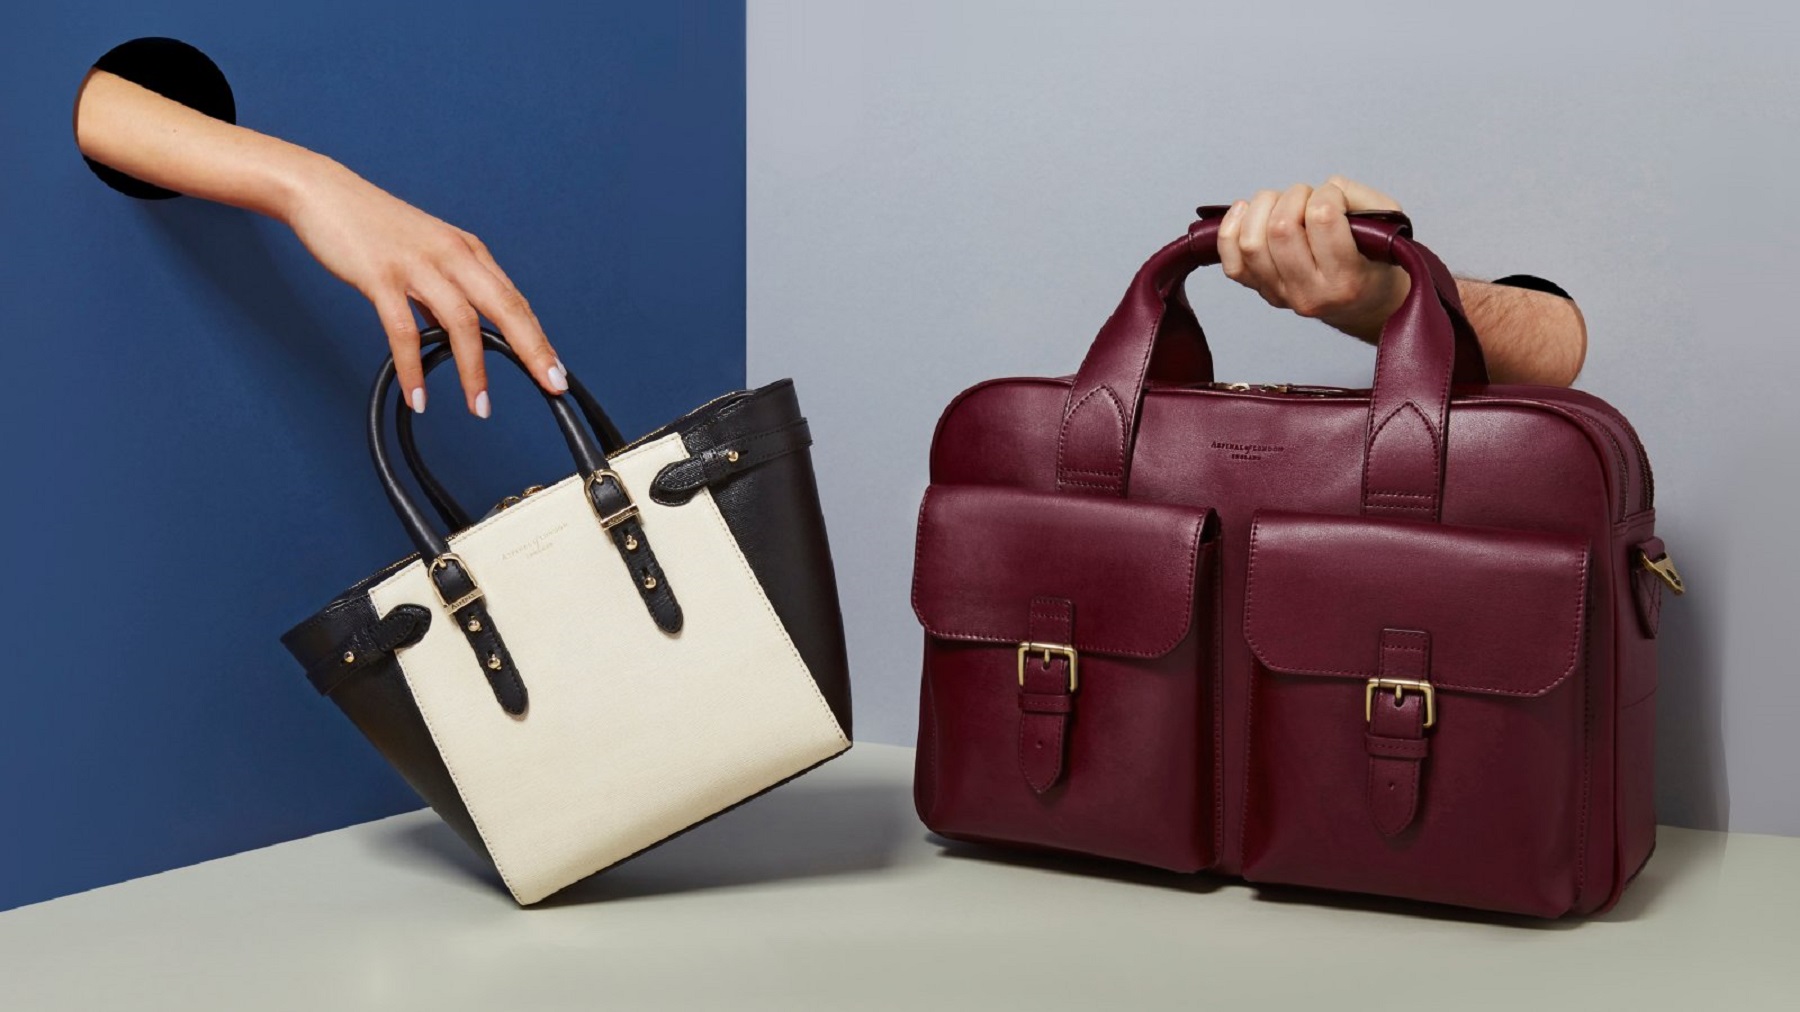 The “Which Handbag Are You?” Quiz